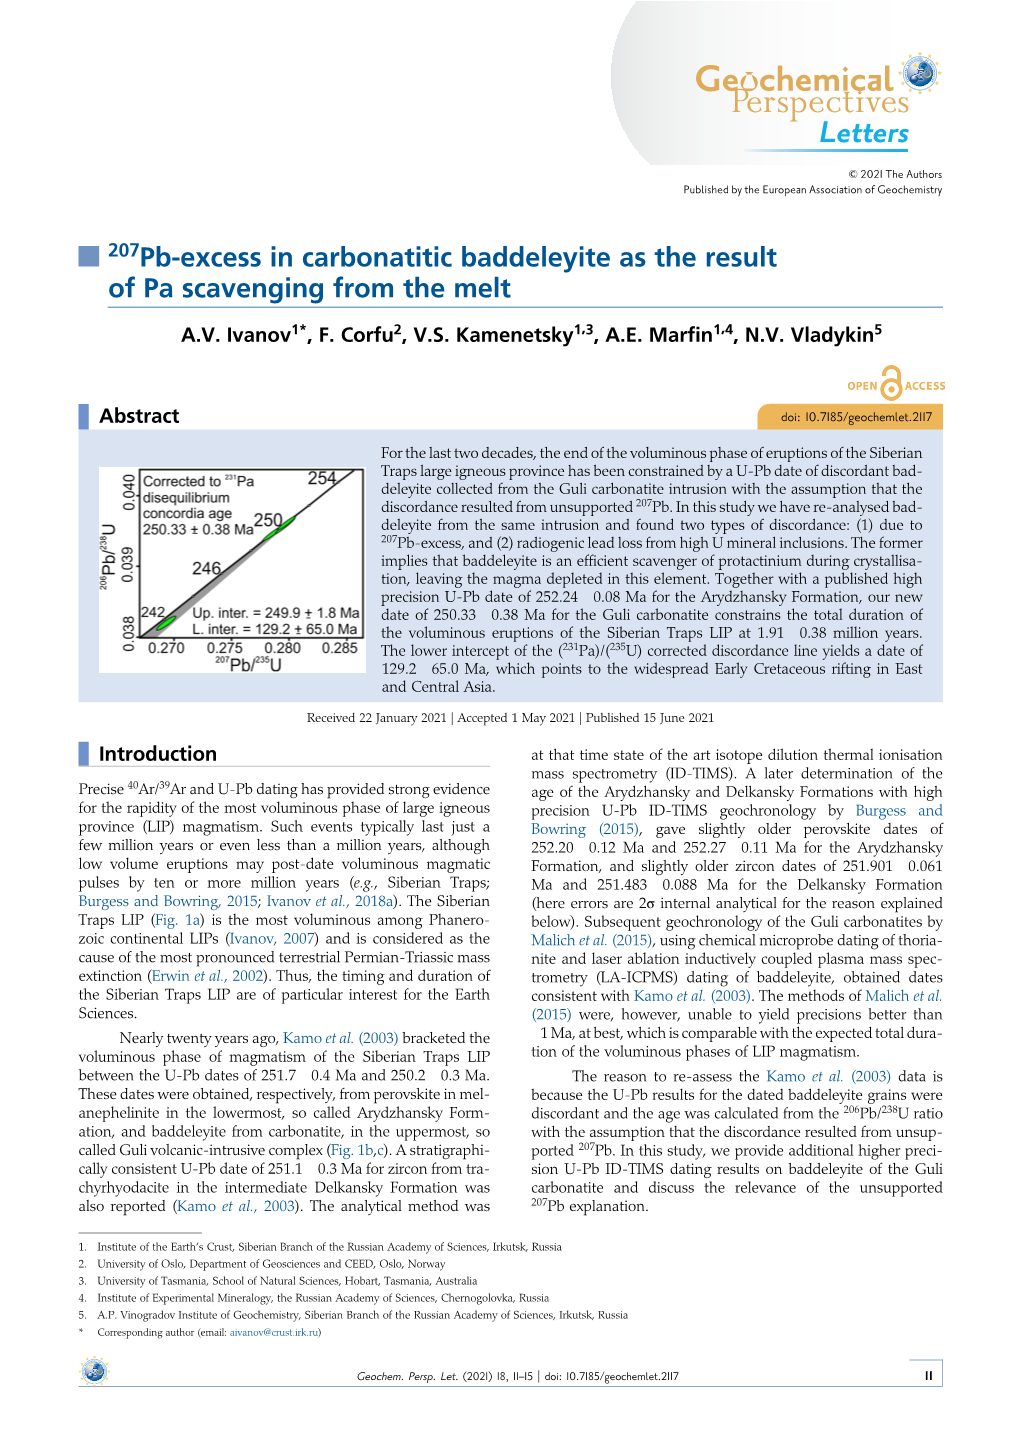 207Pb-Excess in Carbonatitic Baddeleyite As the Result of Pa Scavenging from the Melt